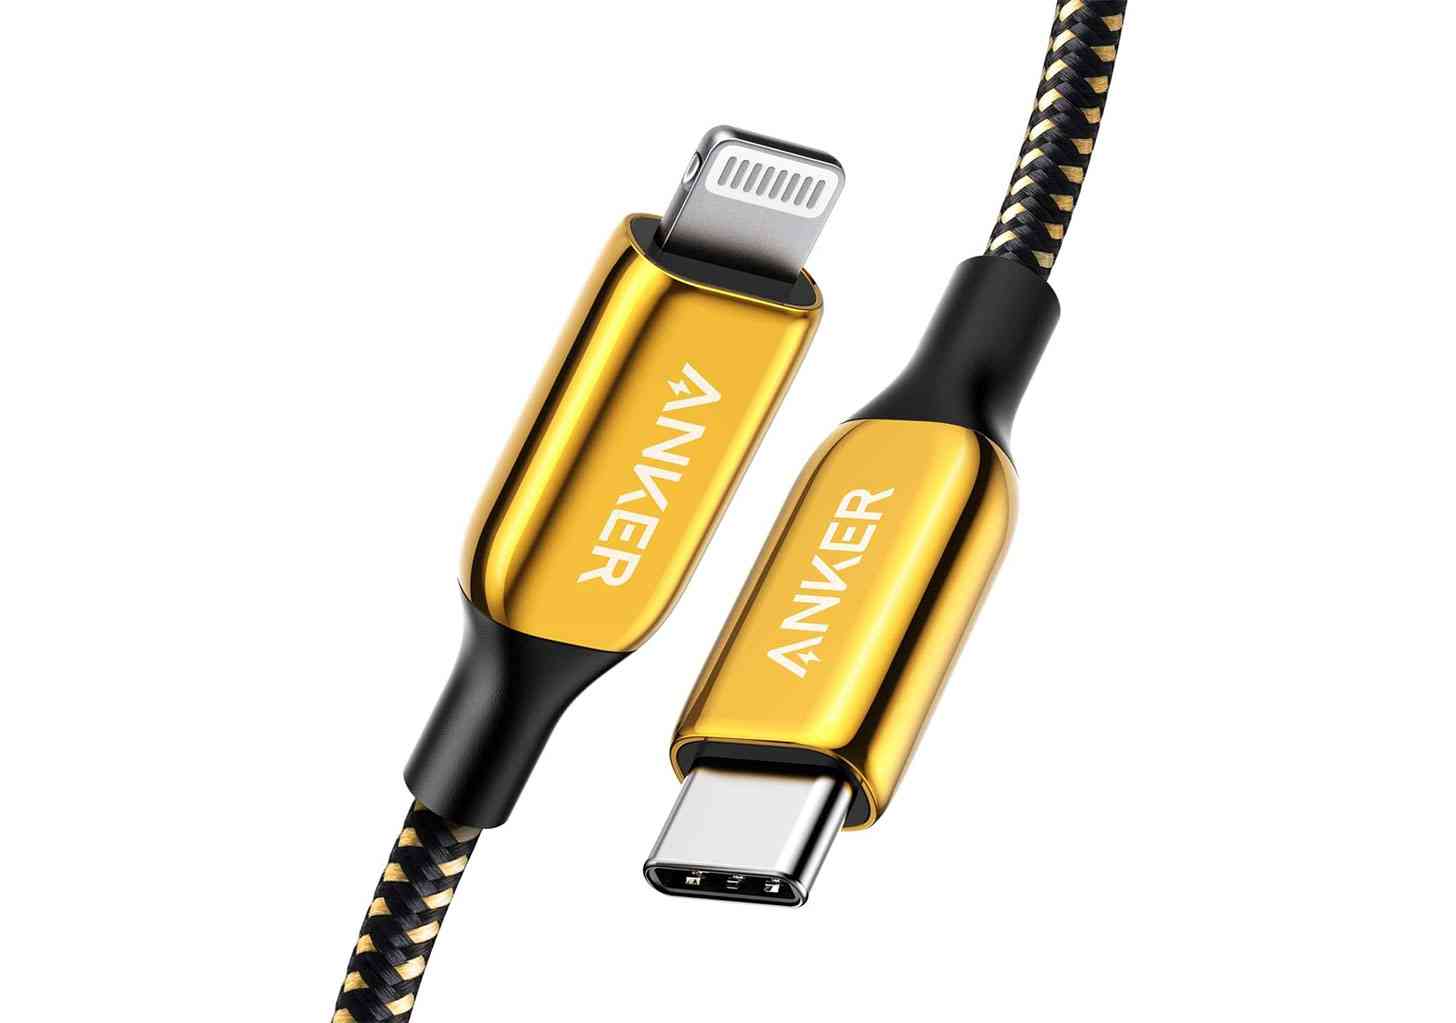 Anker 24K gold USB-C to Lightning charging cable